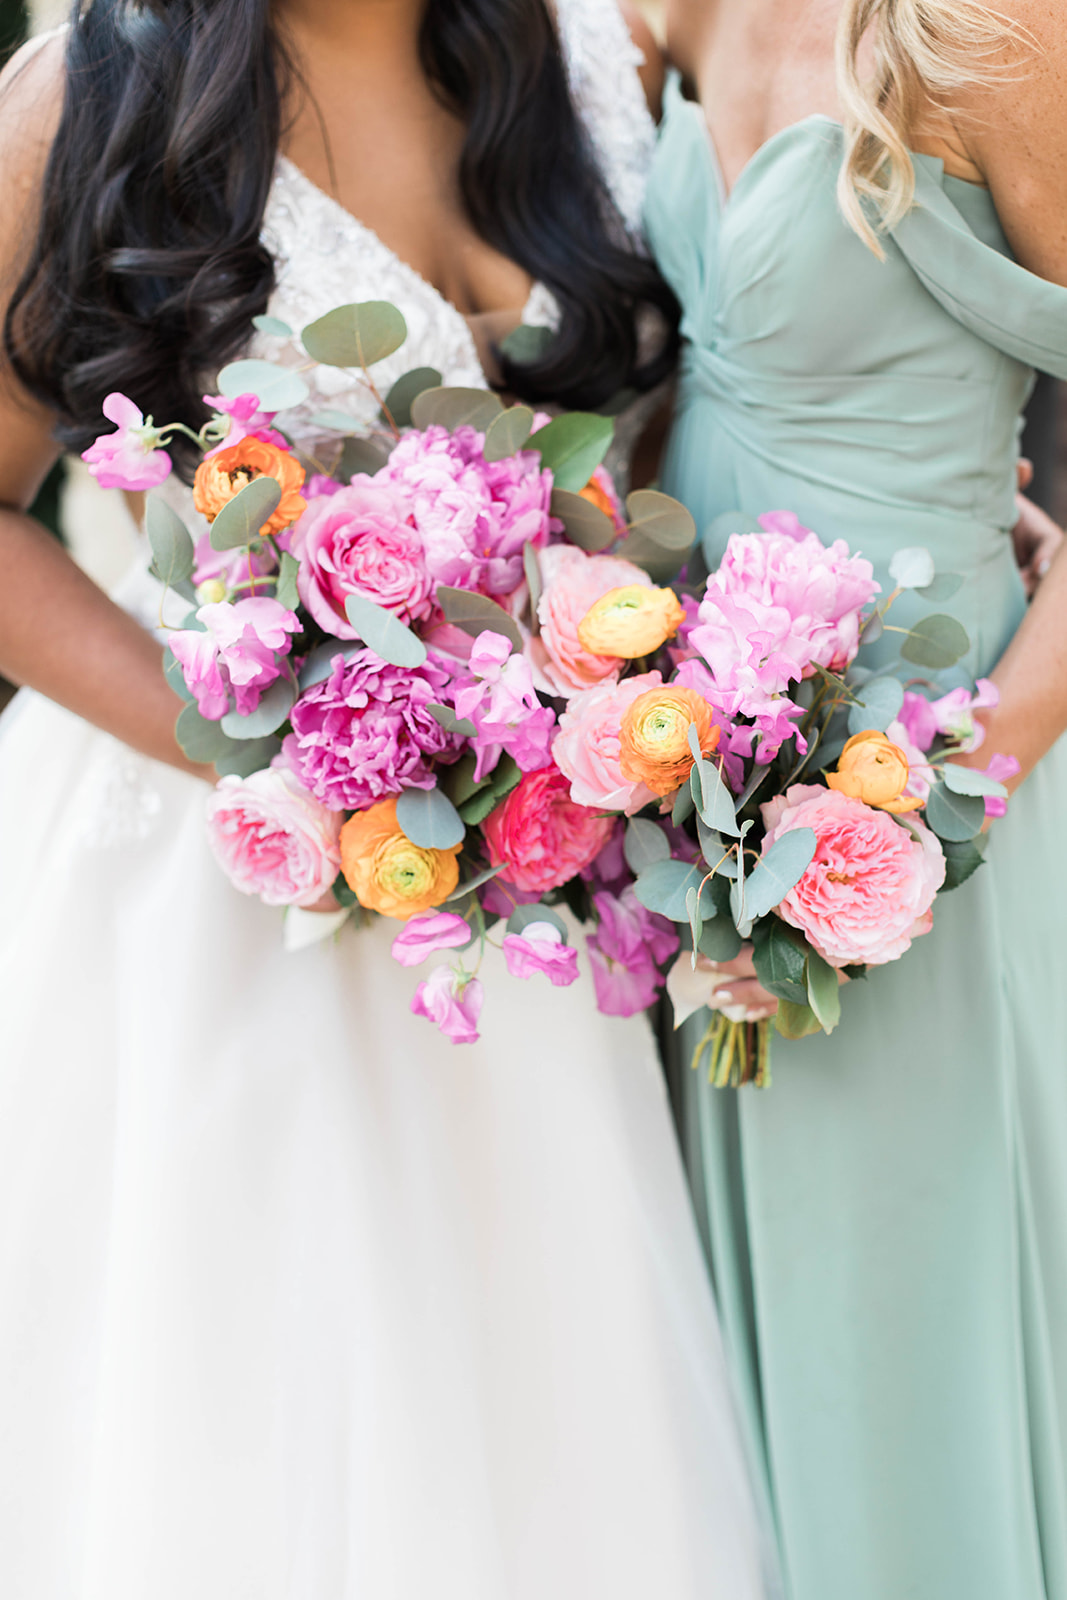 A bride and bridesmaid bouquets with bright pink, green, and orange in the spring